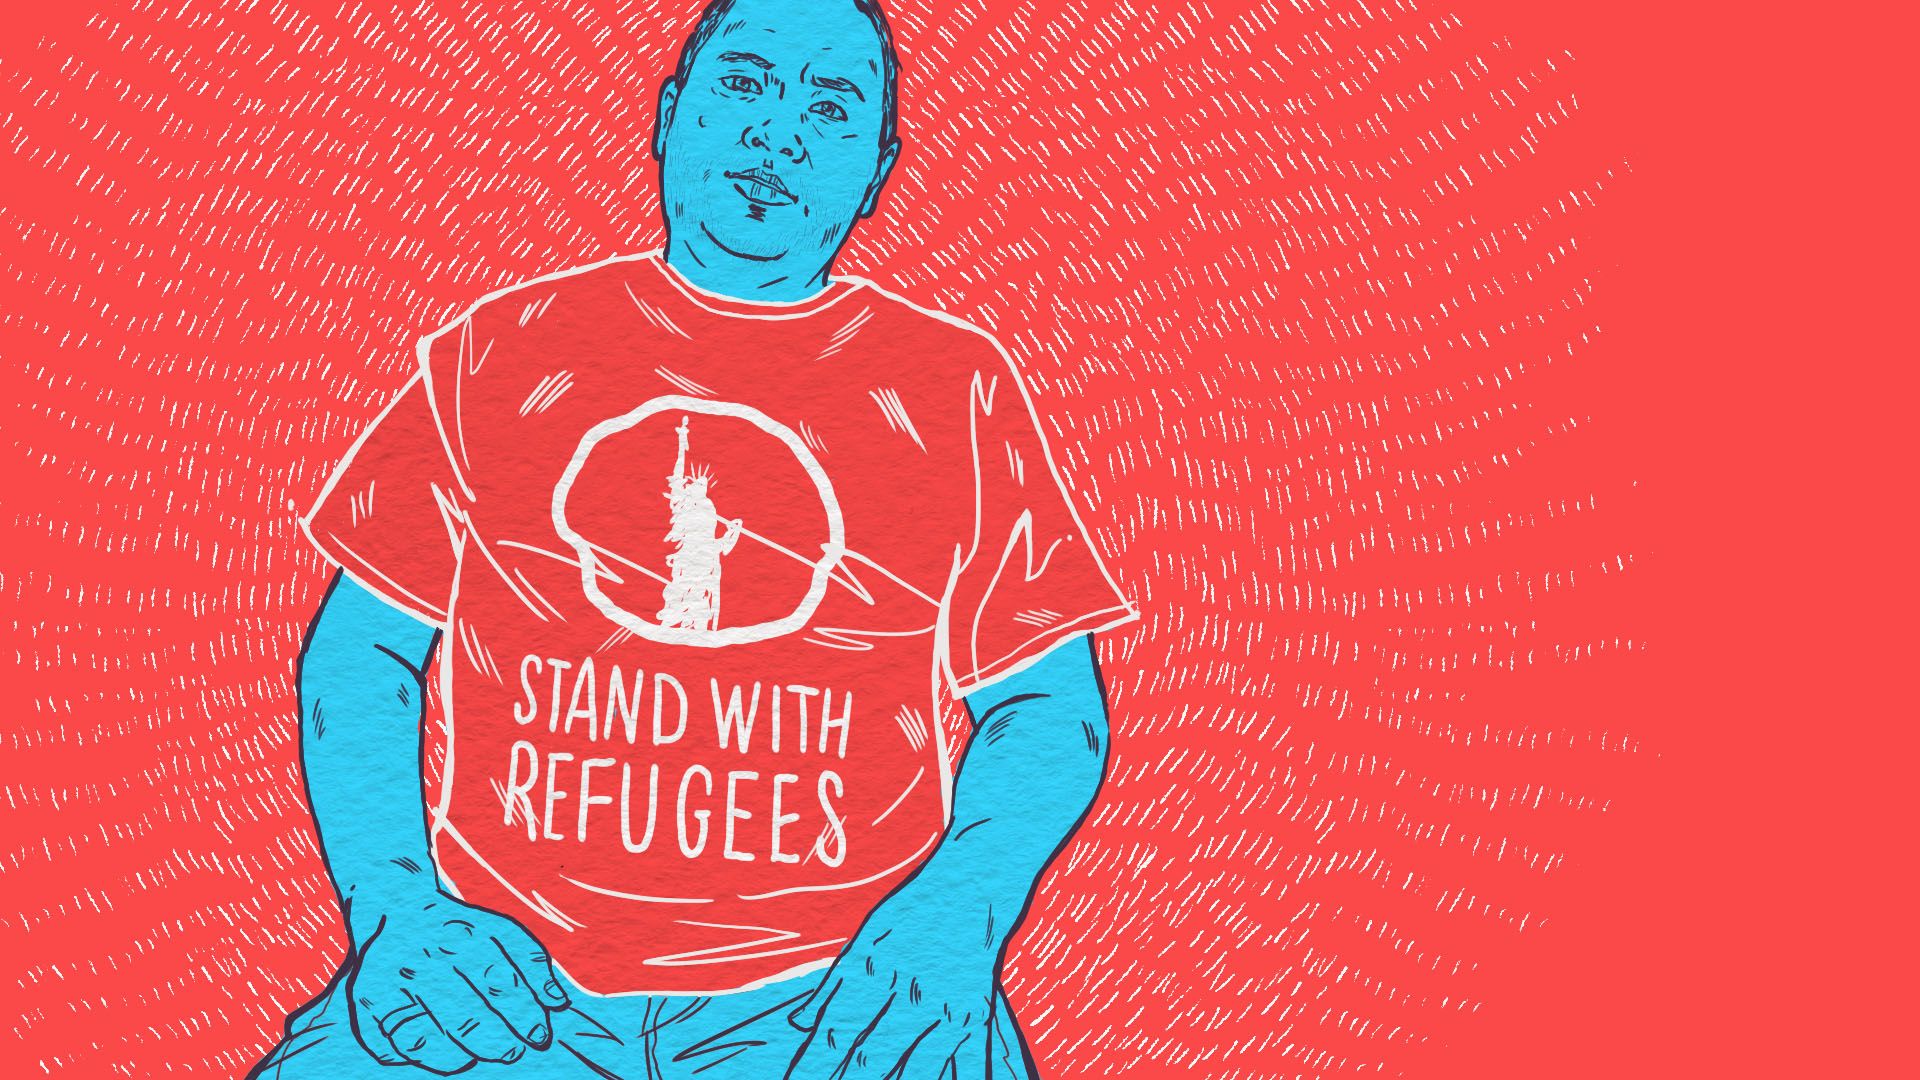 An illustration of a man wearing a red t-shirt that says "stand with refugees"